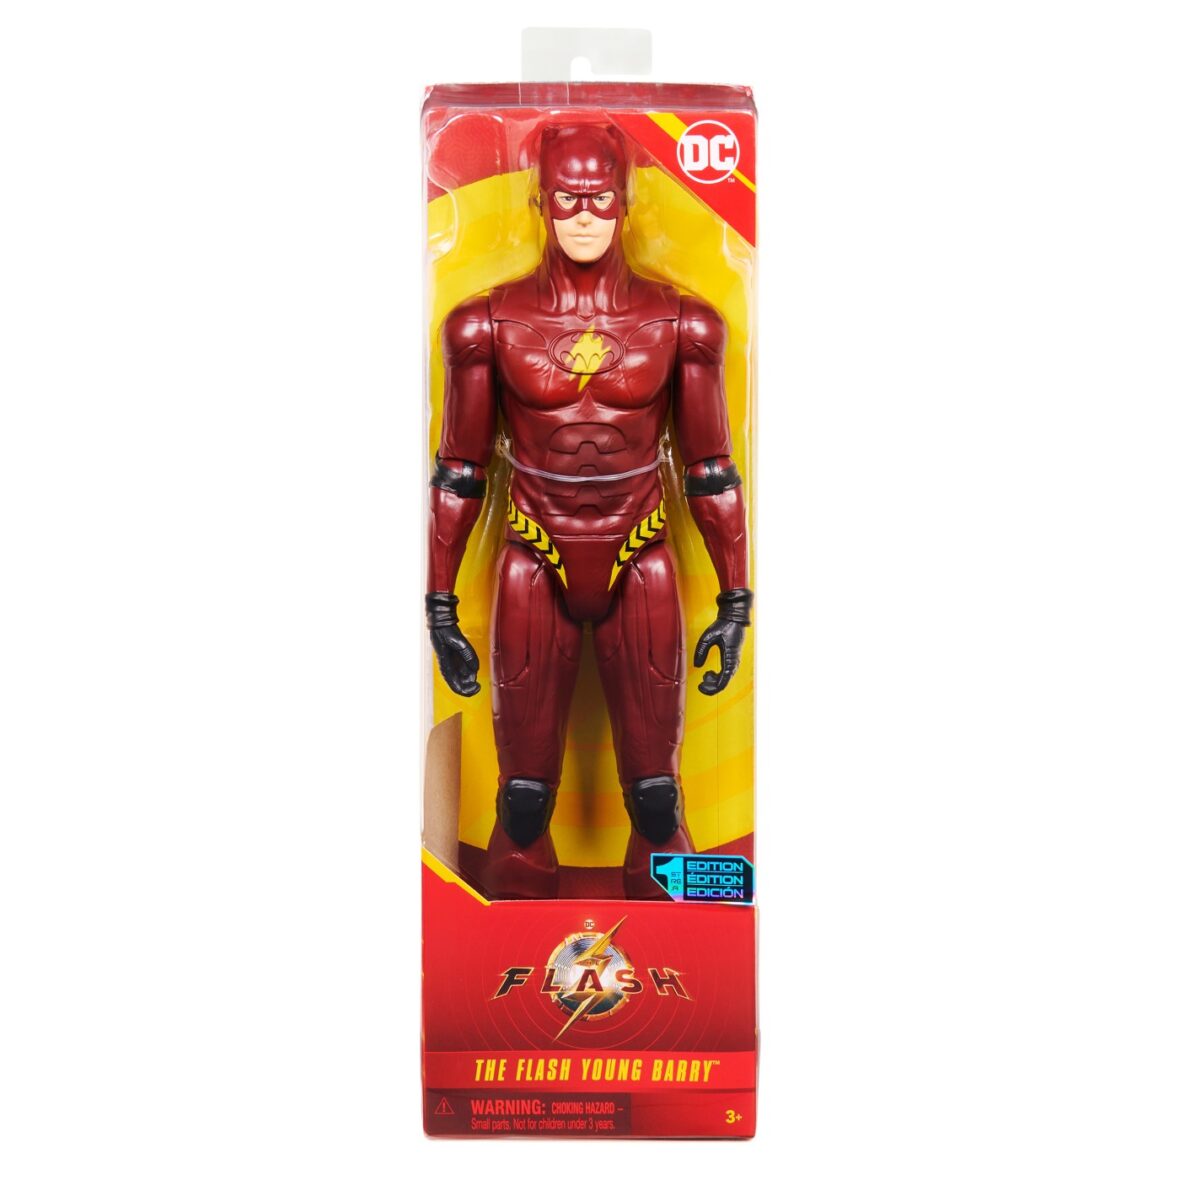 The Flash Figurina Flush Young Barry 30cm